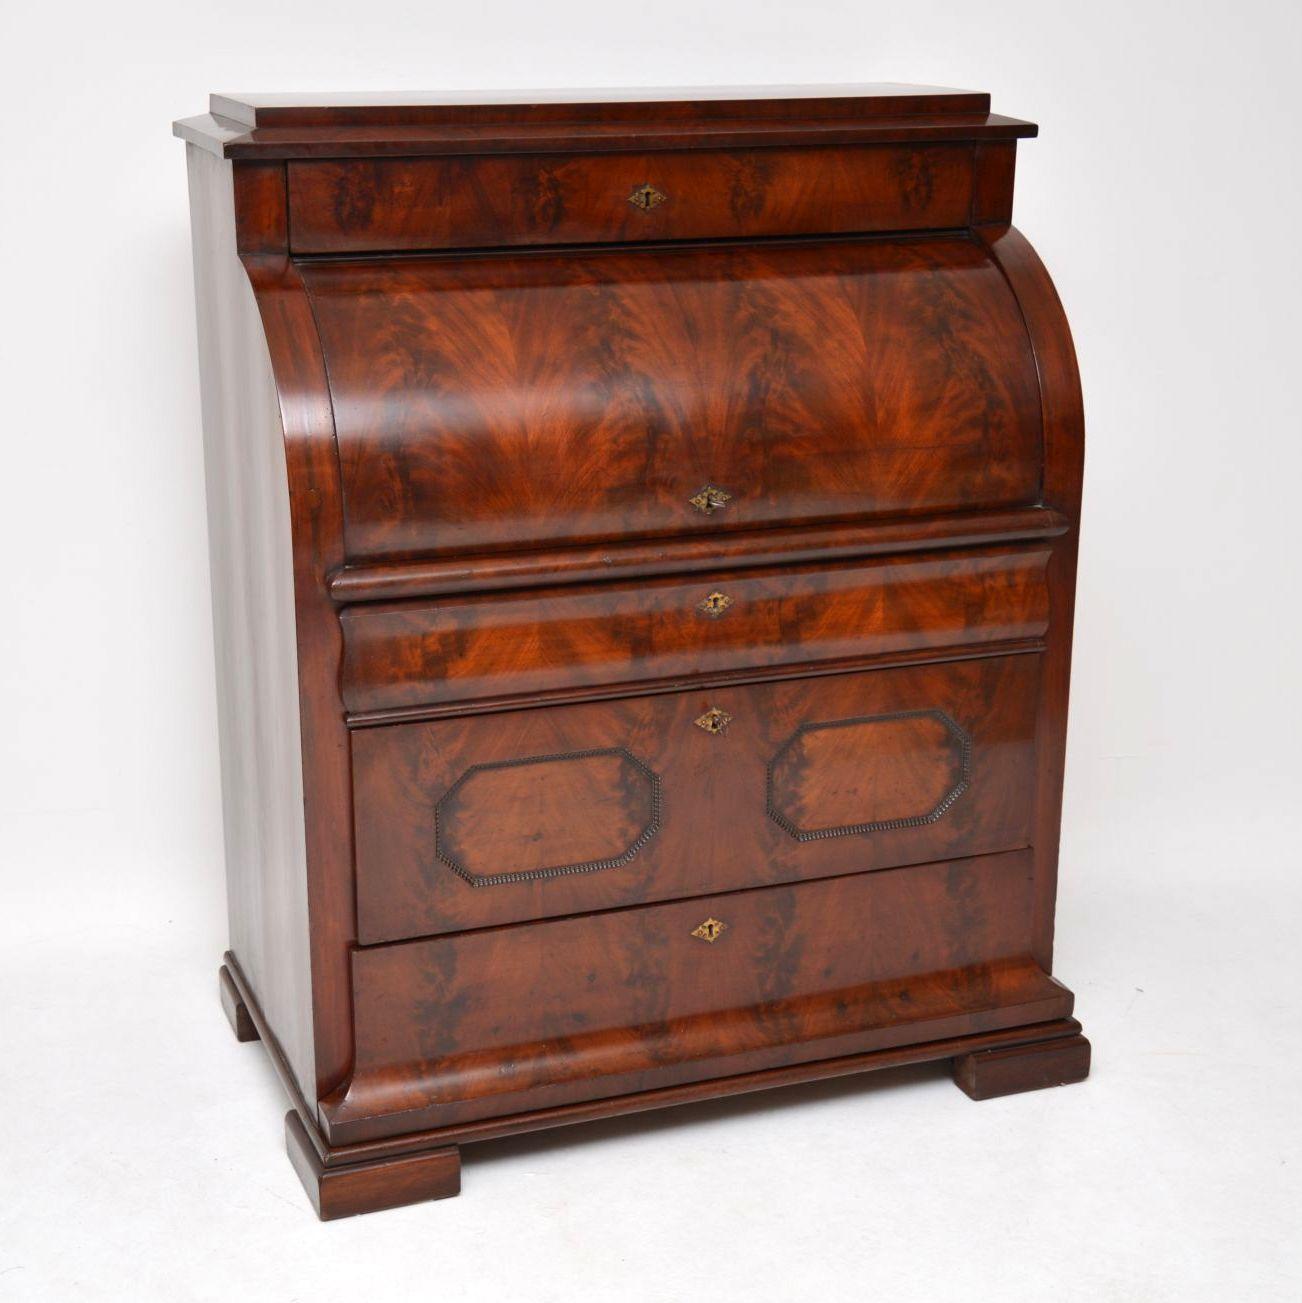 This antique mahogany cylinder top bureau is a spectacular piece of furniture and is in excellent condition. I believe it’s French and dates from circa 1840s period. Please enlarge all the images to see all the many fine details and see how the